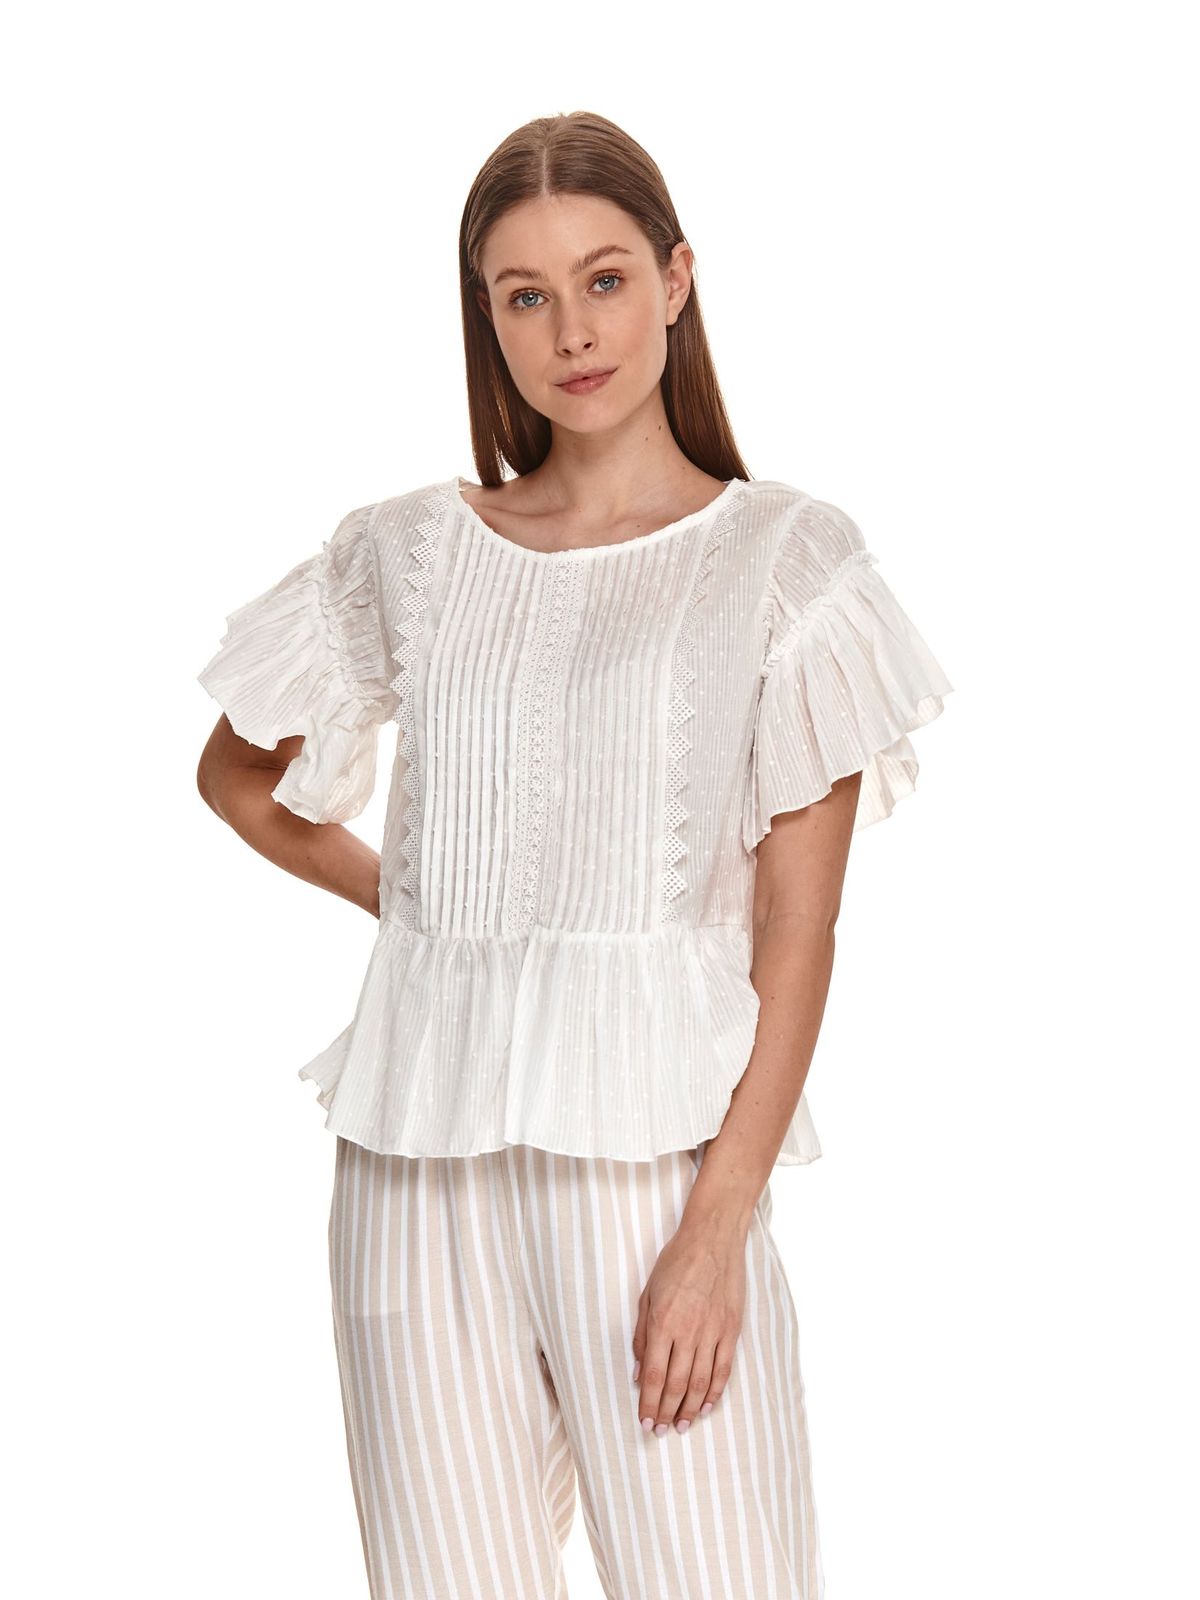 Ivory women`s blouse plumeti with ruffle details loose fit slightly transparent fabric